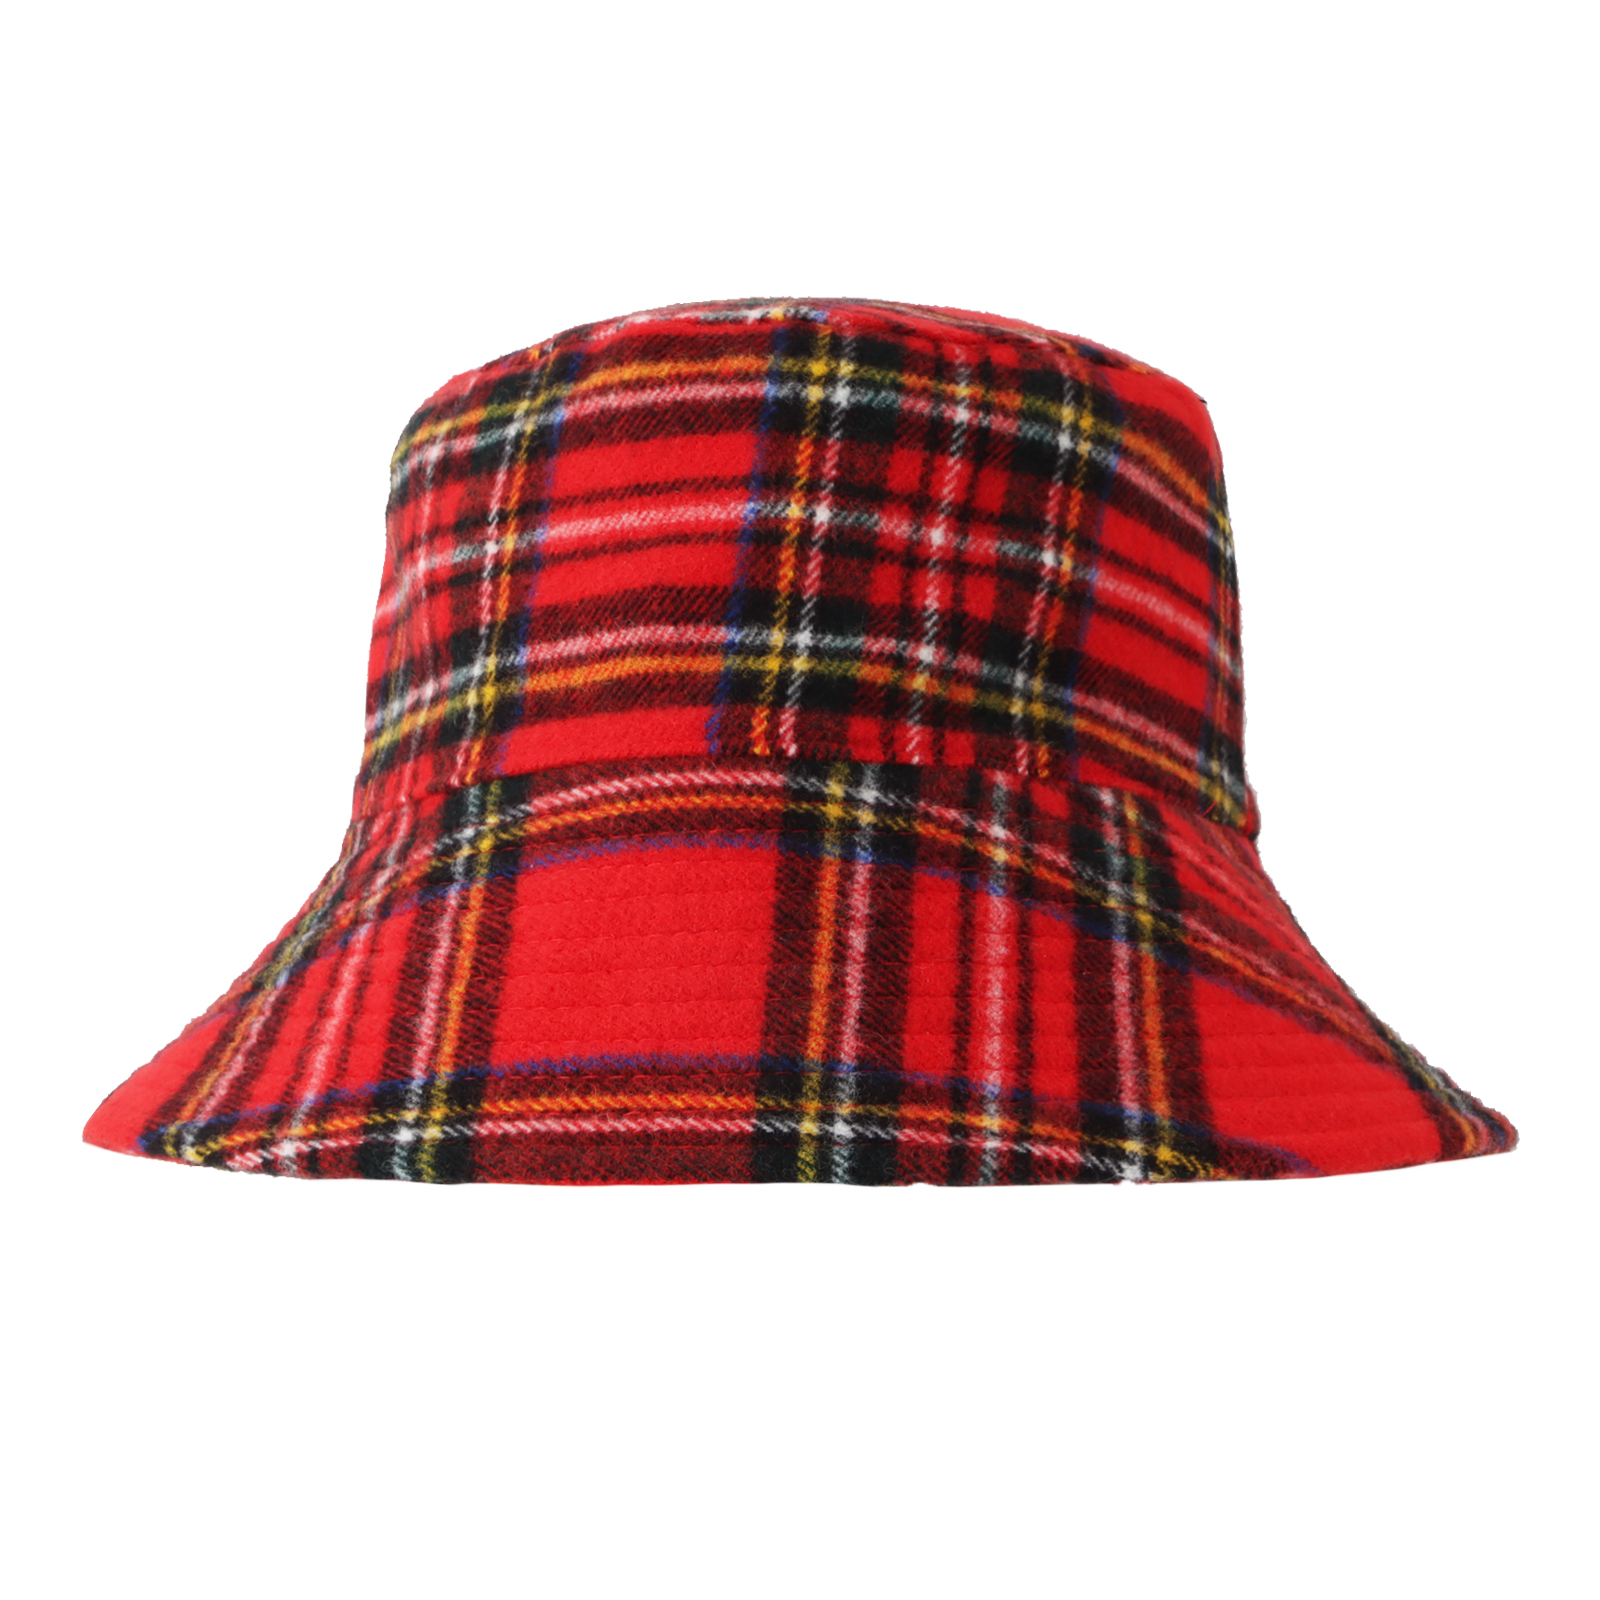 WITHMOONS Polyester Plaid Tartan Bucket Fedora Hat Winter Check Cap HMB1299 (Red) - image 1 of 5